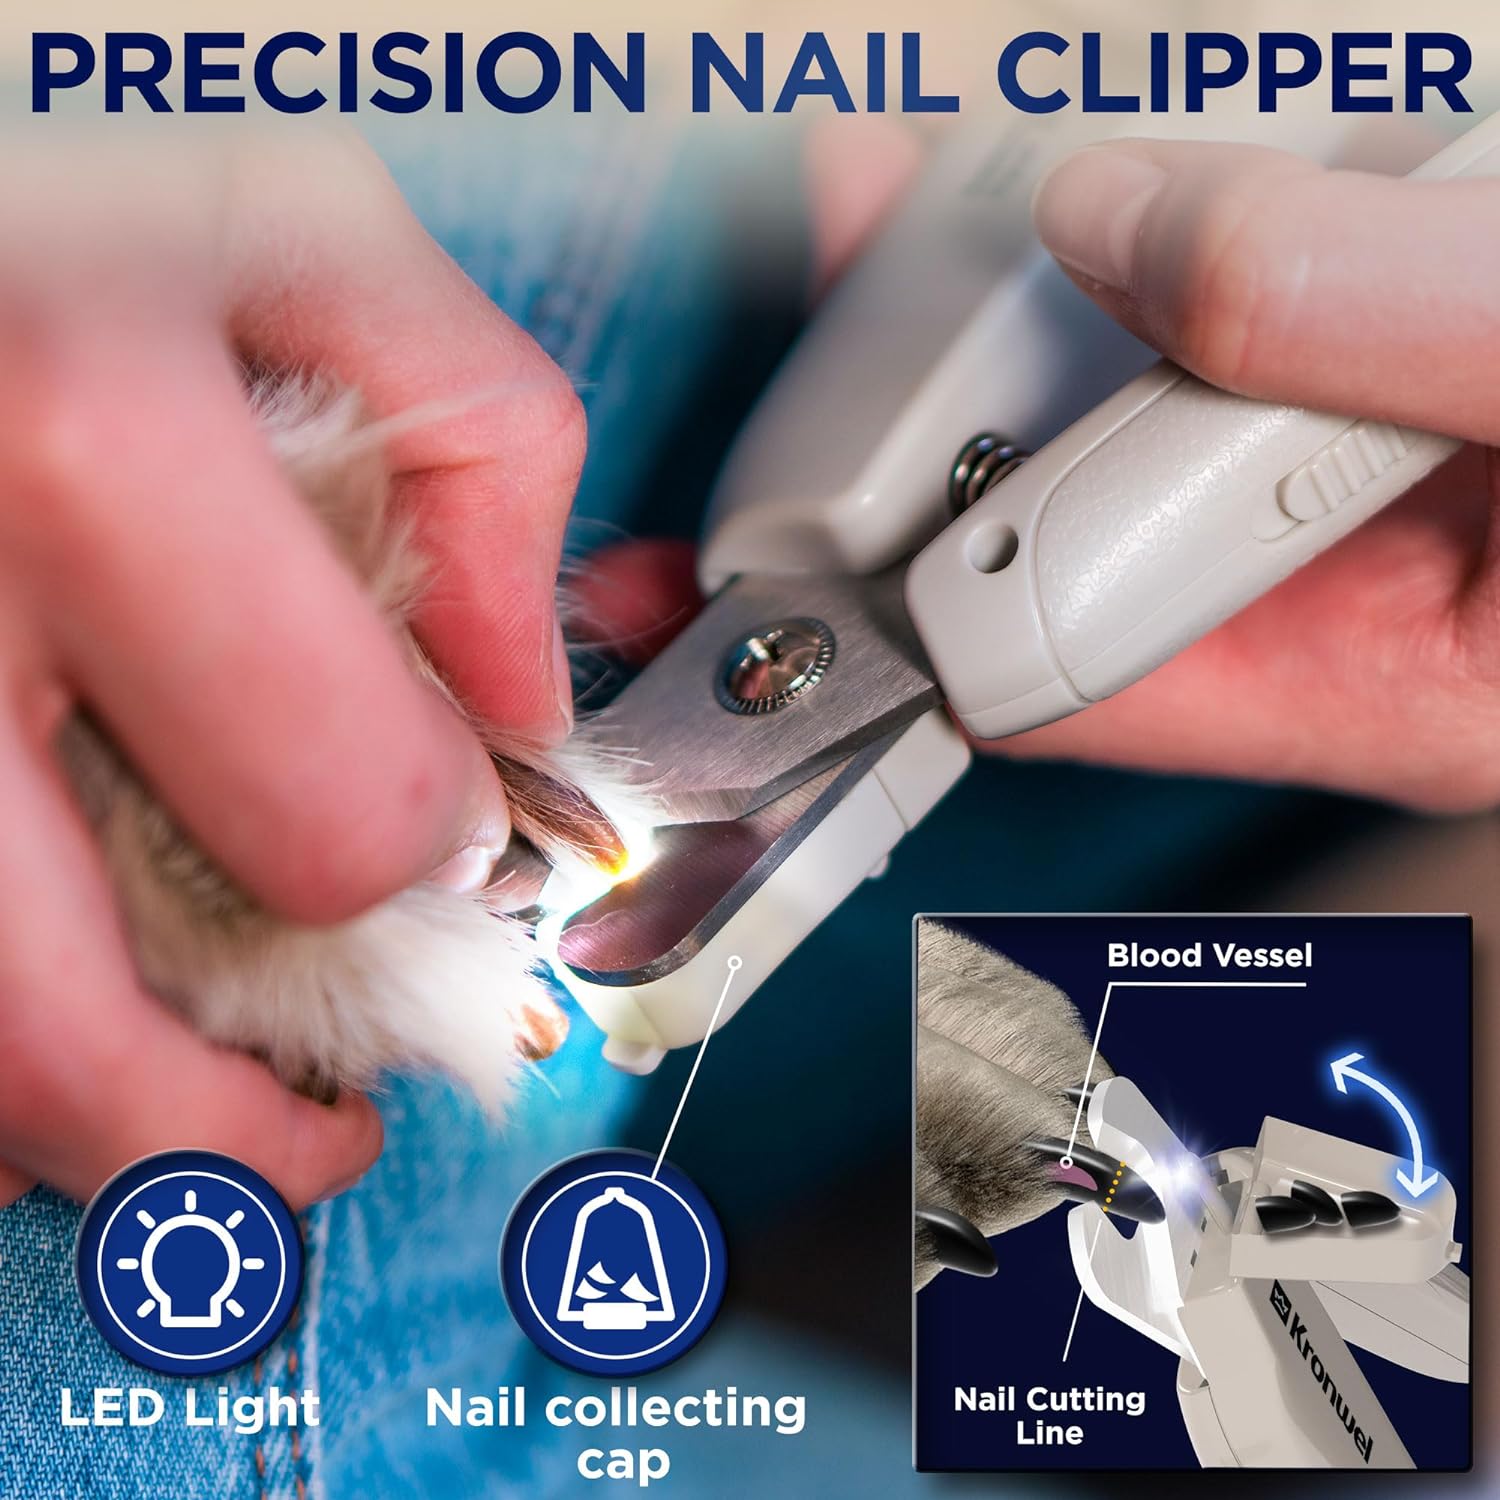 Pet Claw Care Grinder and Clipper